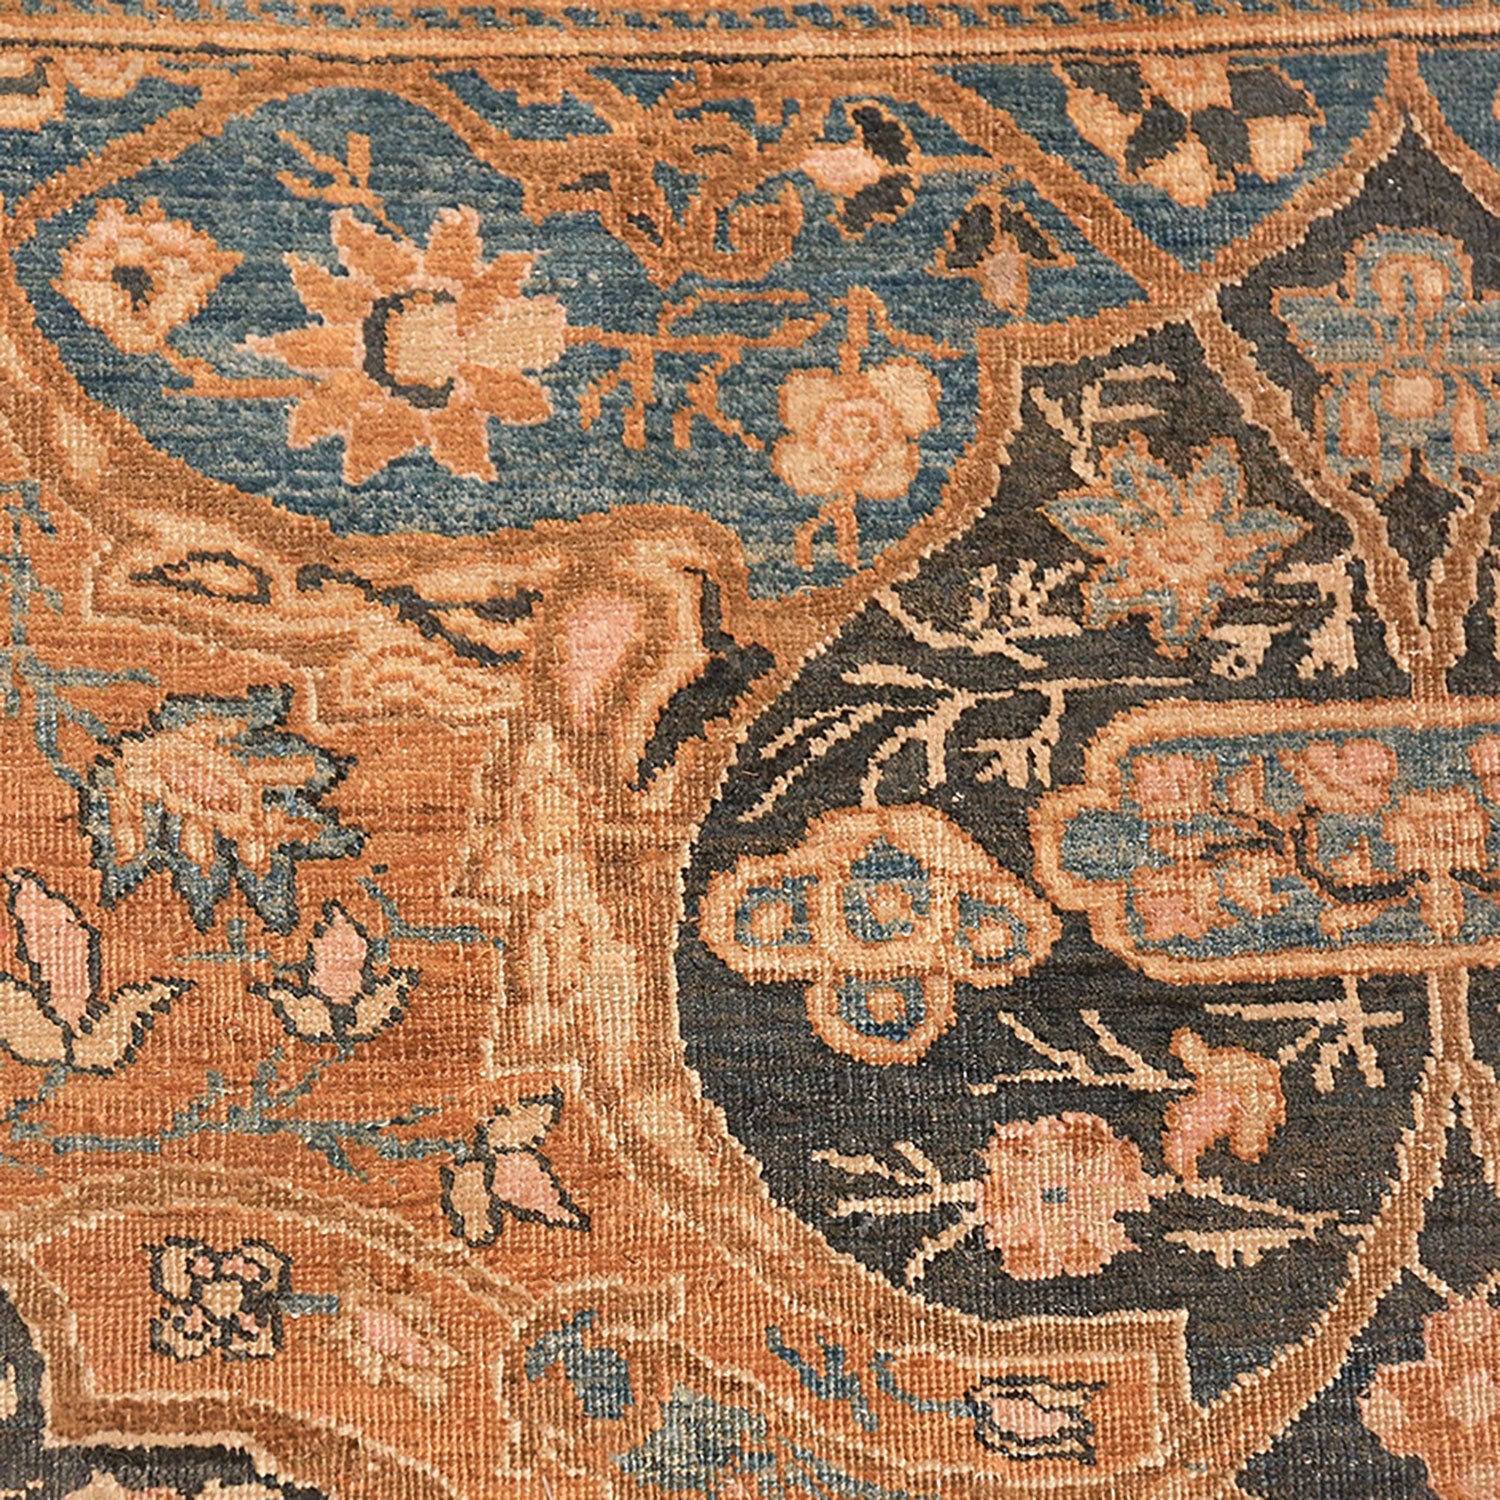 Exquisite hand-woven rug showcases intricate floral and geometric motifs.